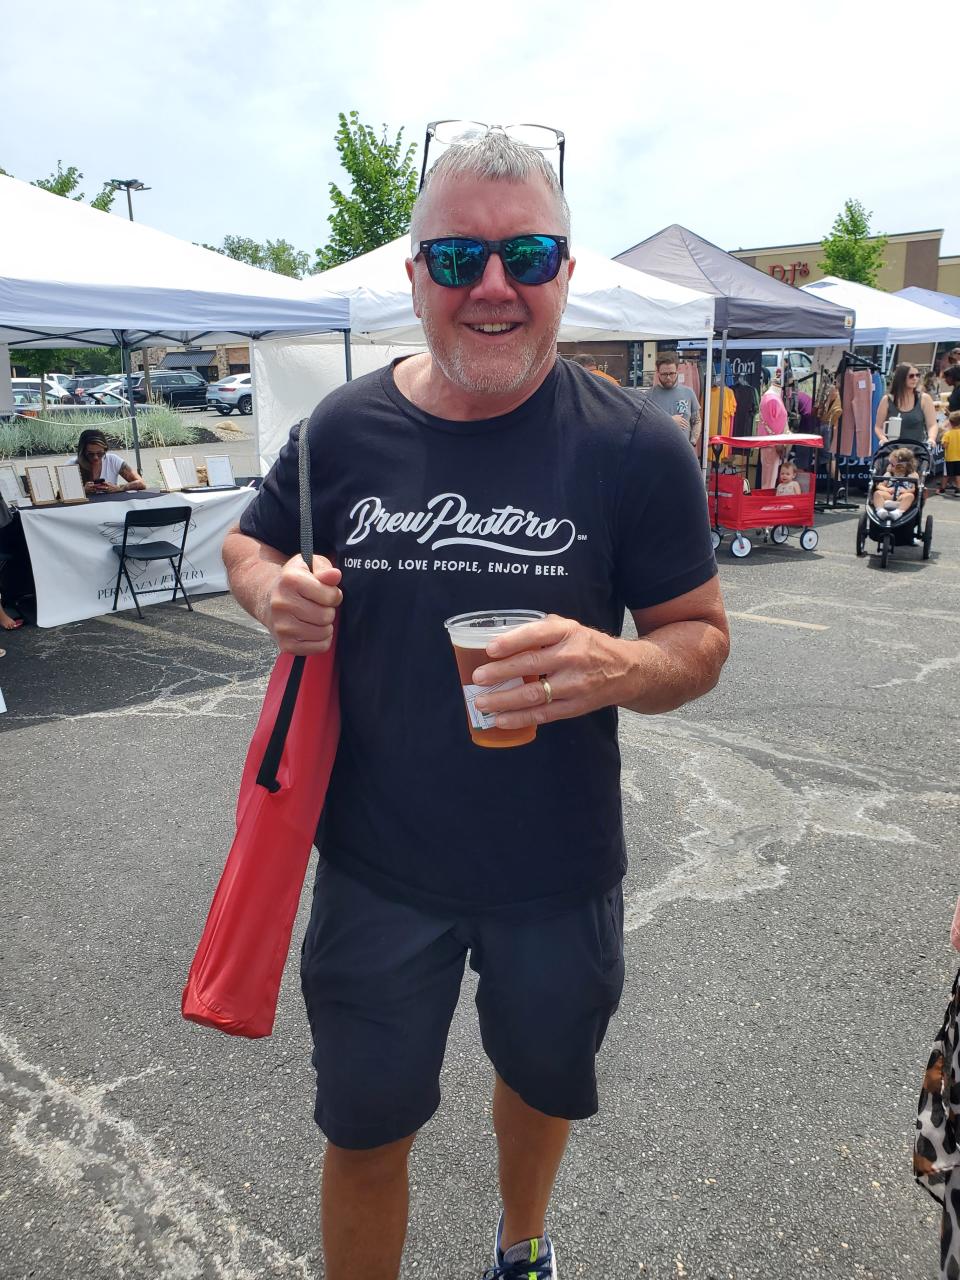 Brew Pastors' Roger Schuler is seen at the 720 Market at Oakwood Square in Plain Township. The group has a tent at the event.